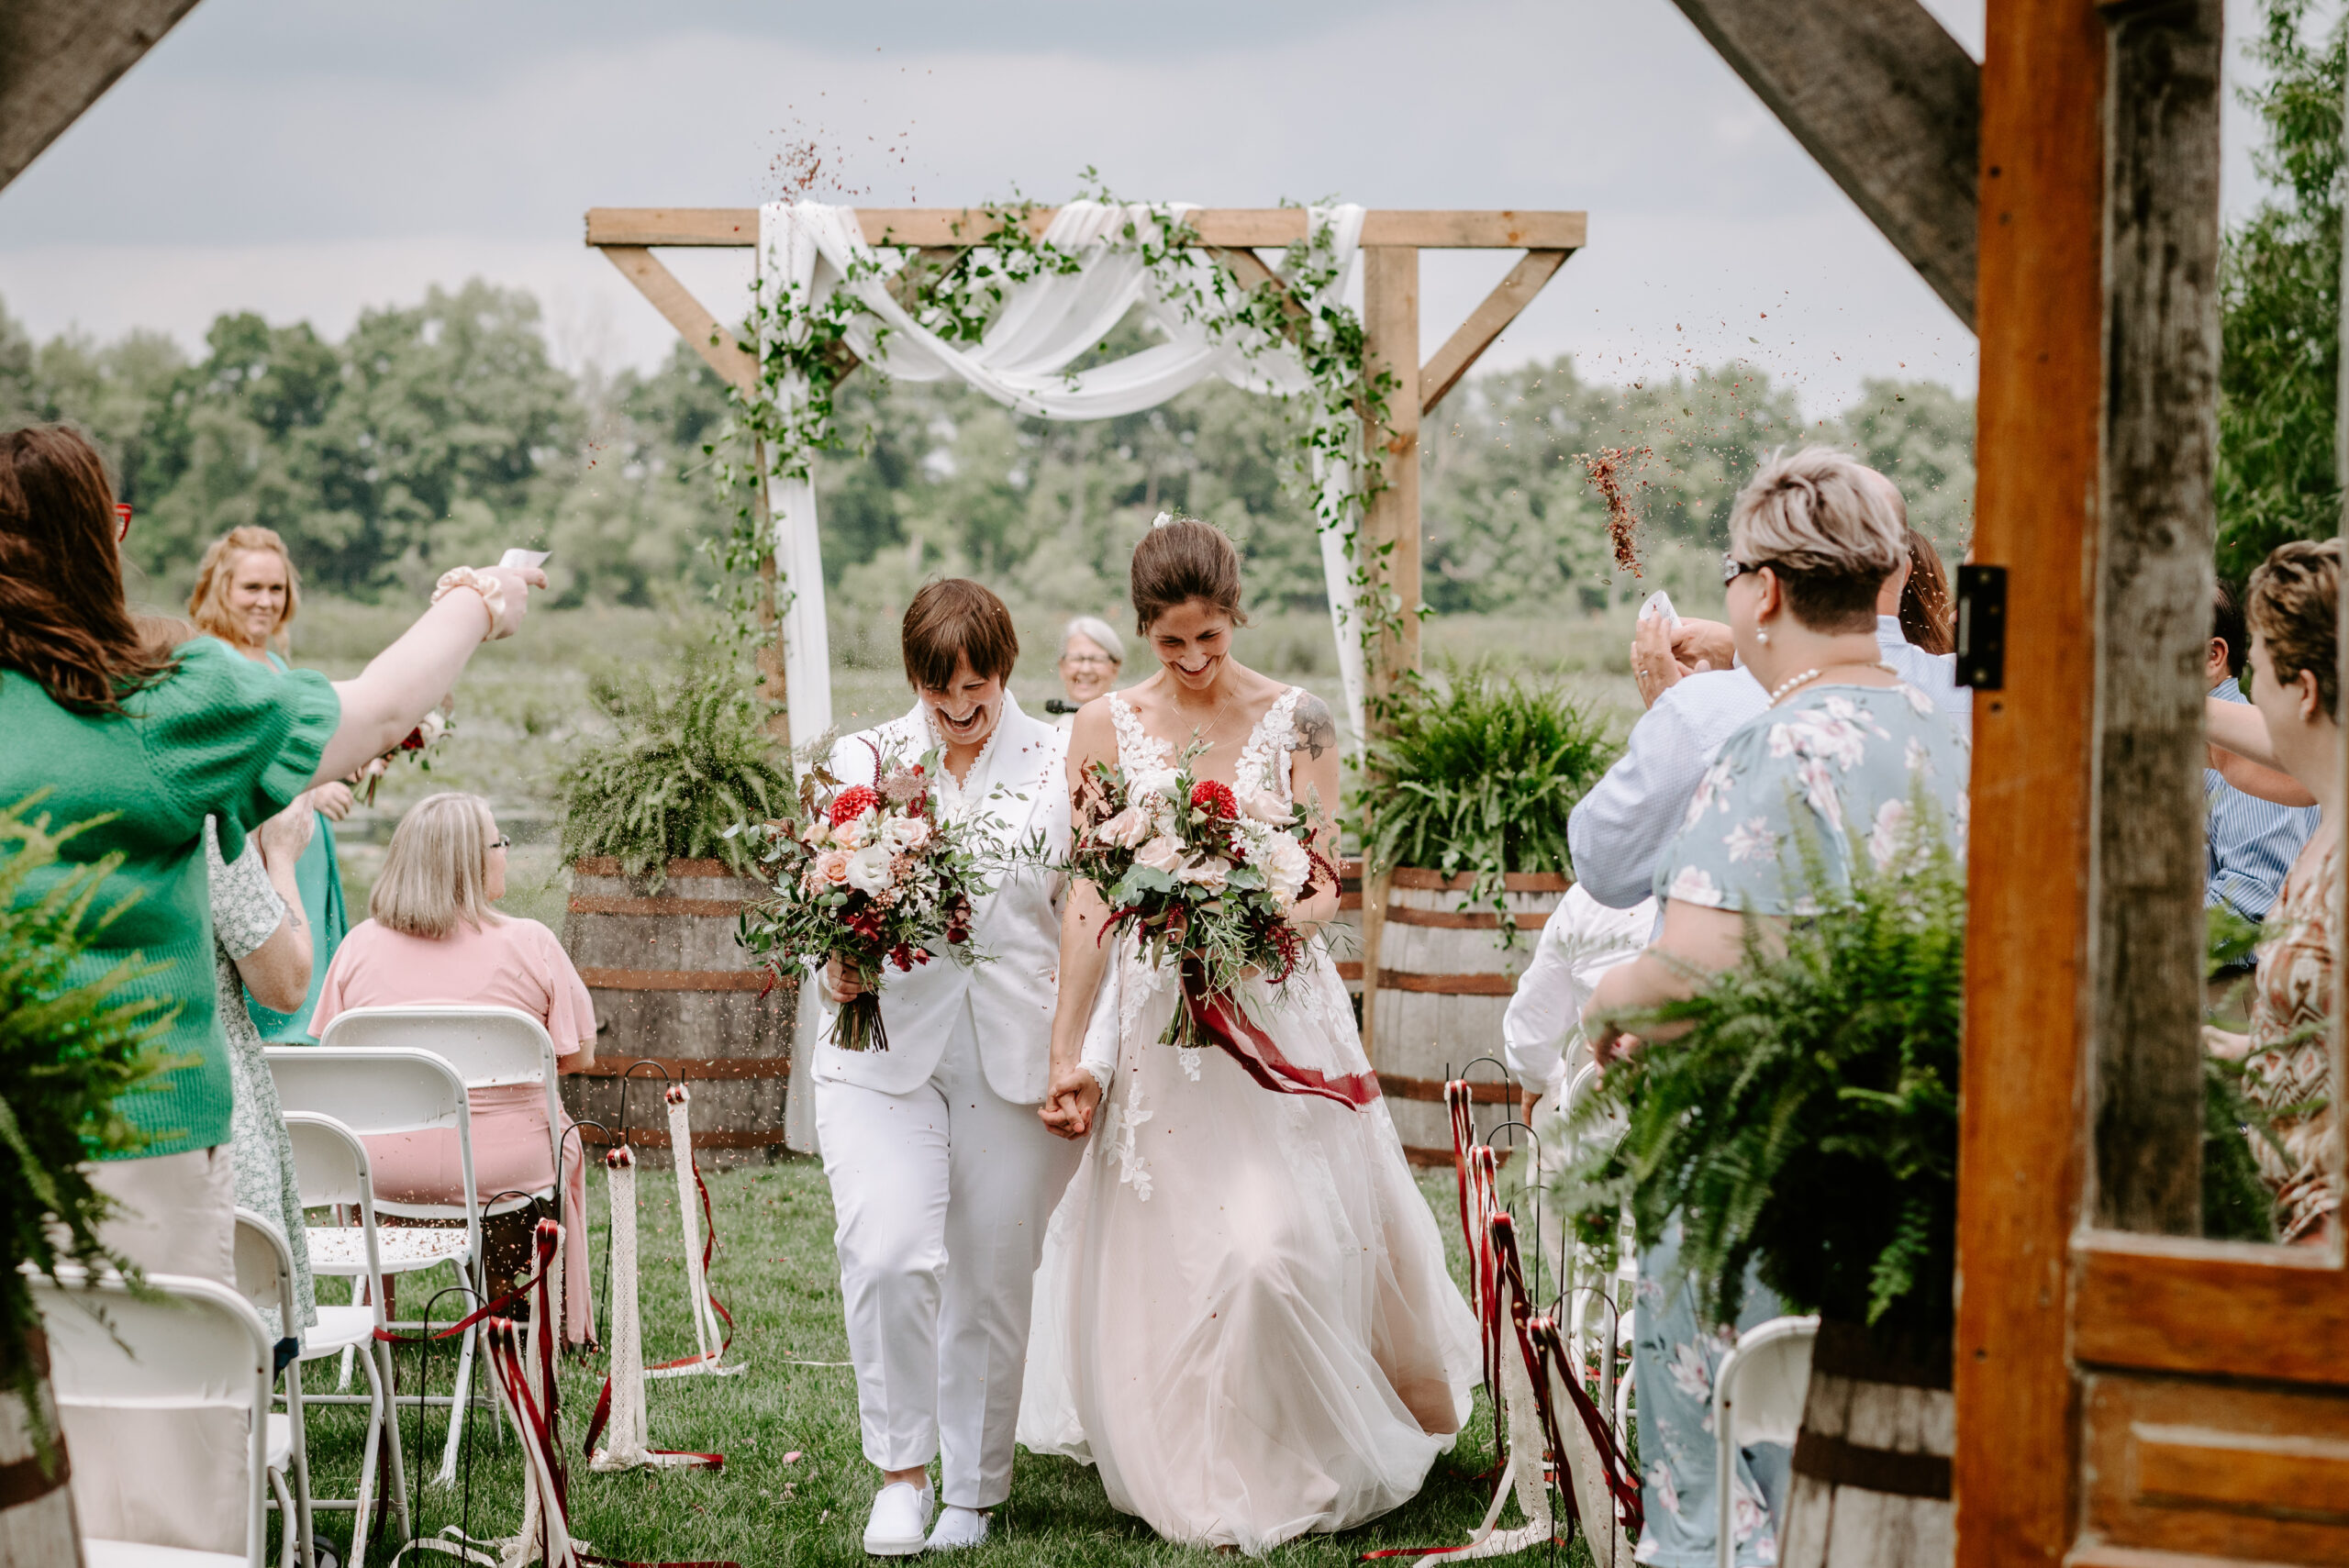 Two brides exiting the ceremony in their LGBTQ plus backyard wedding in Lawton Michigan. One bride wearing white suit from J.Crew other bride wearing white dress both holding wedding florals photographed by queer wedding photographer Liv Lyszyk photography from Grand Rapids Michigan